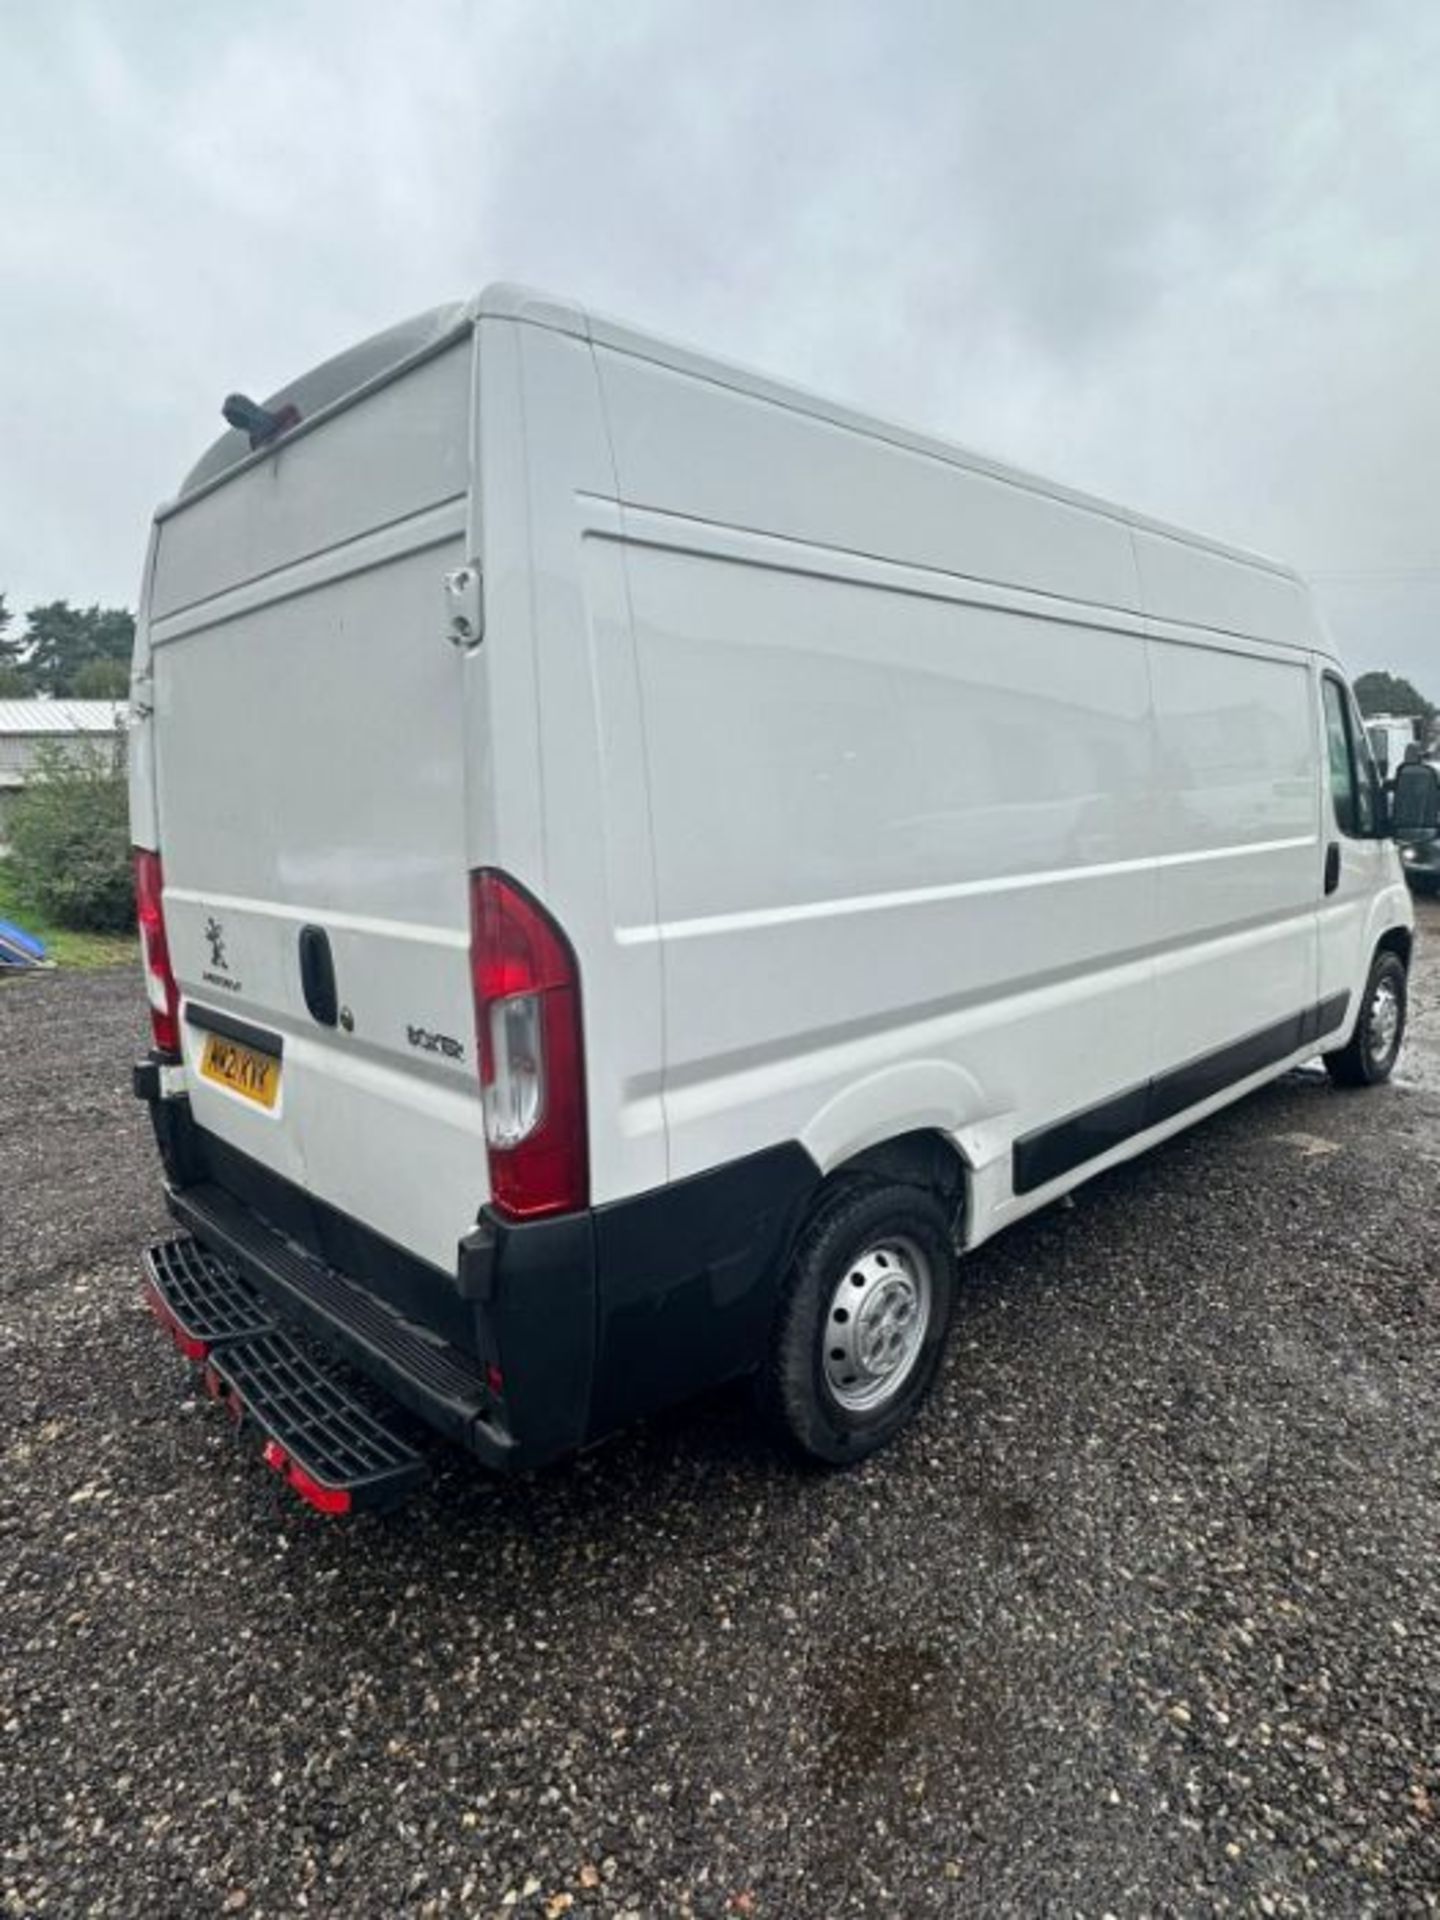 2021 21 PEUGEOT BOXER PROFESSIONAL PANEL VAN - 34K MILE - AIR CON - PLY LINED. - Image 3 of 7